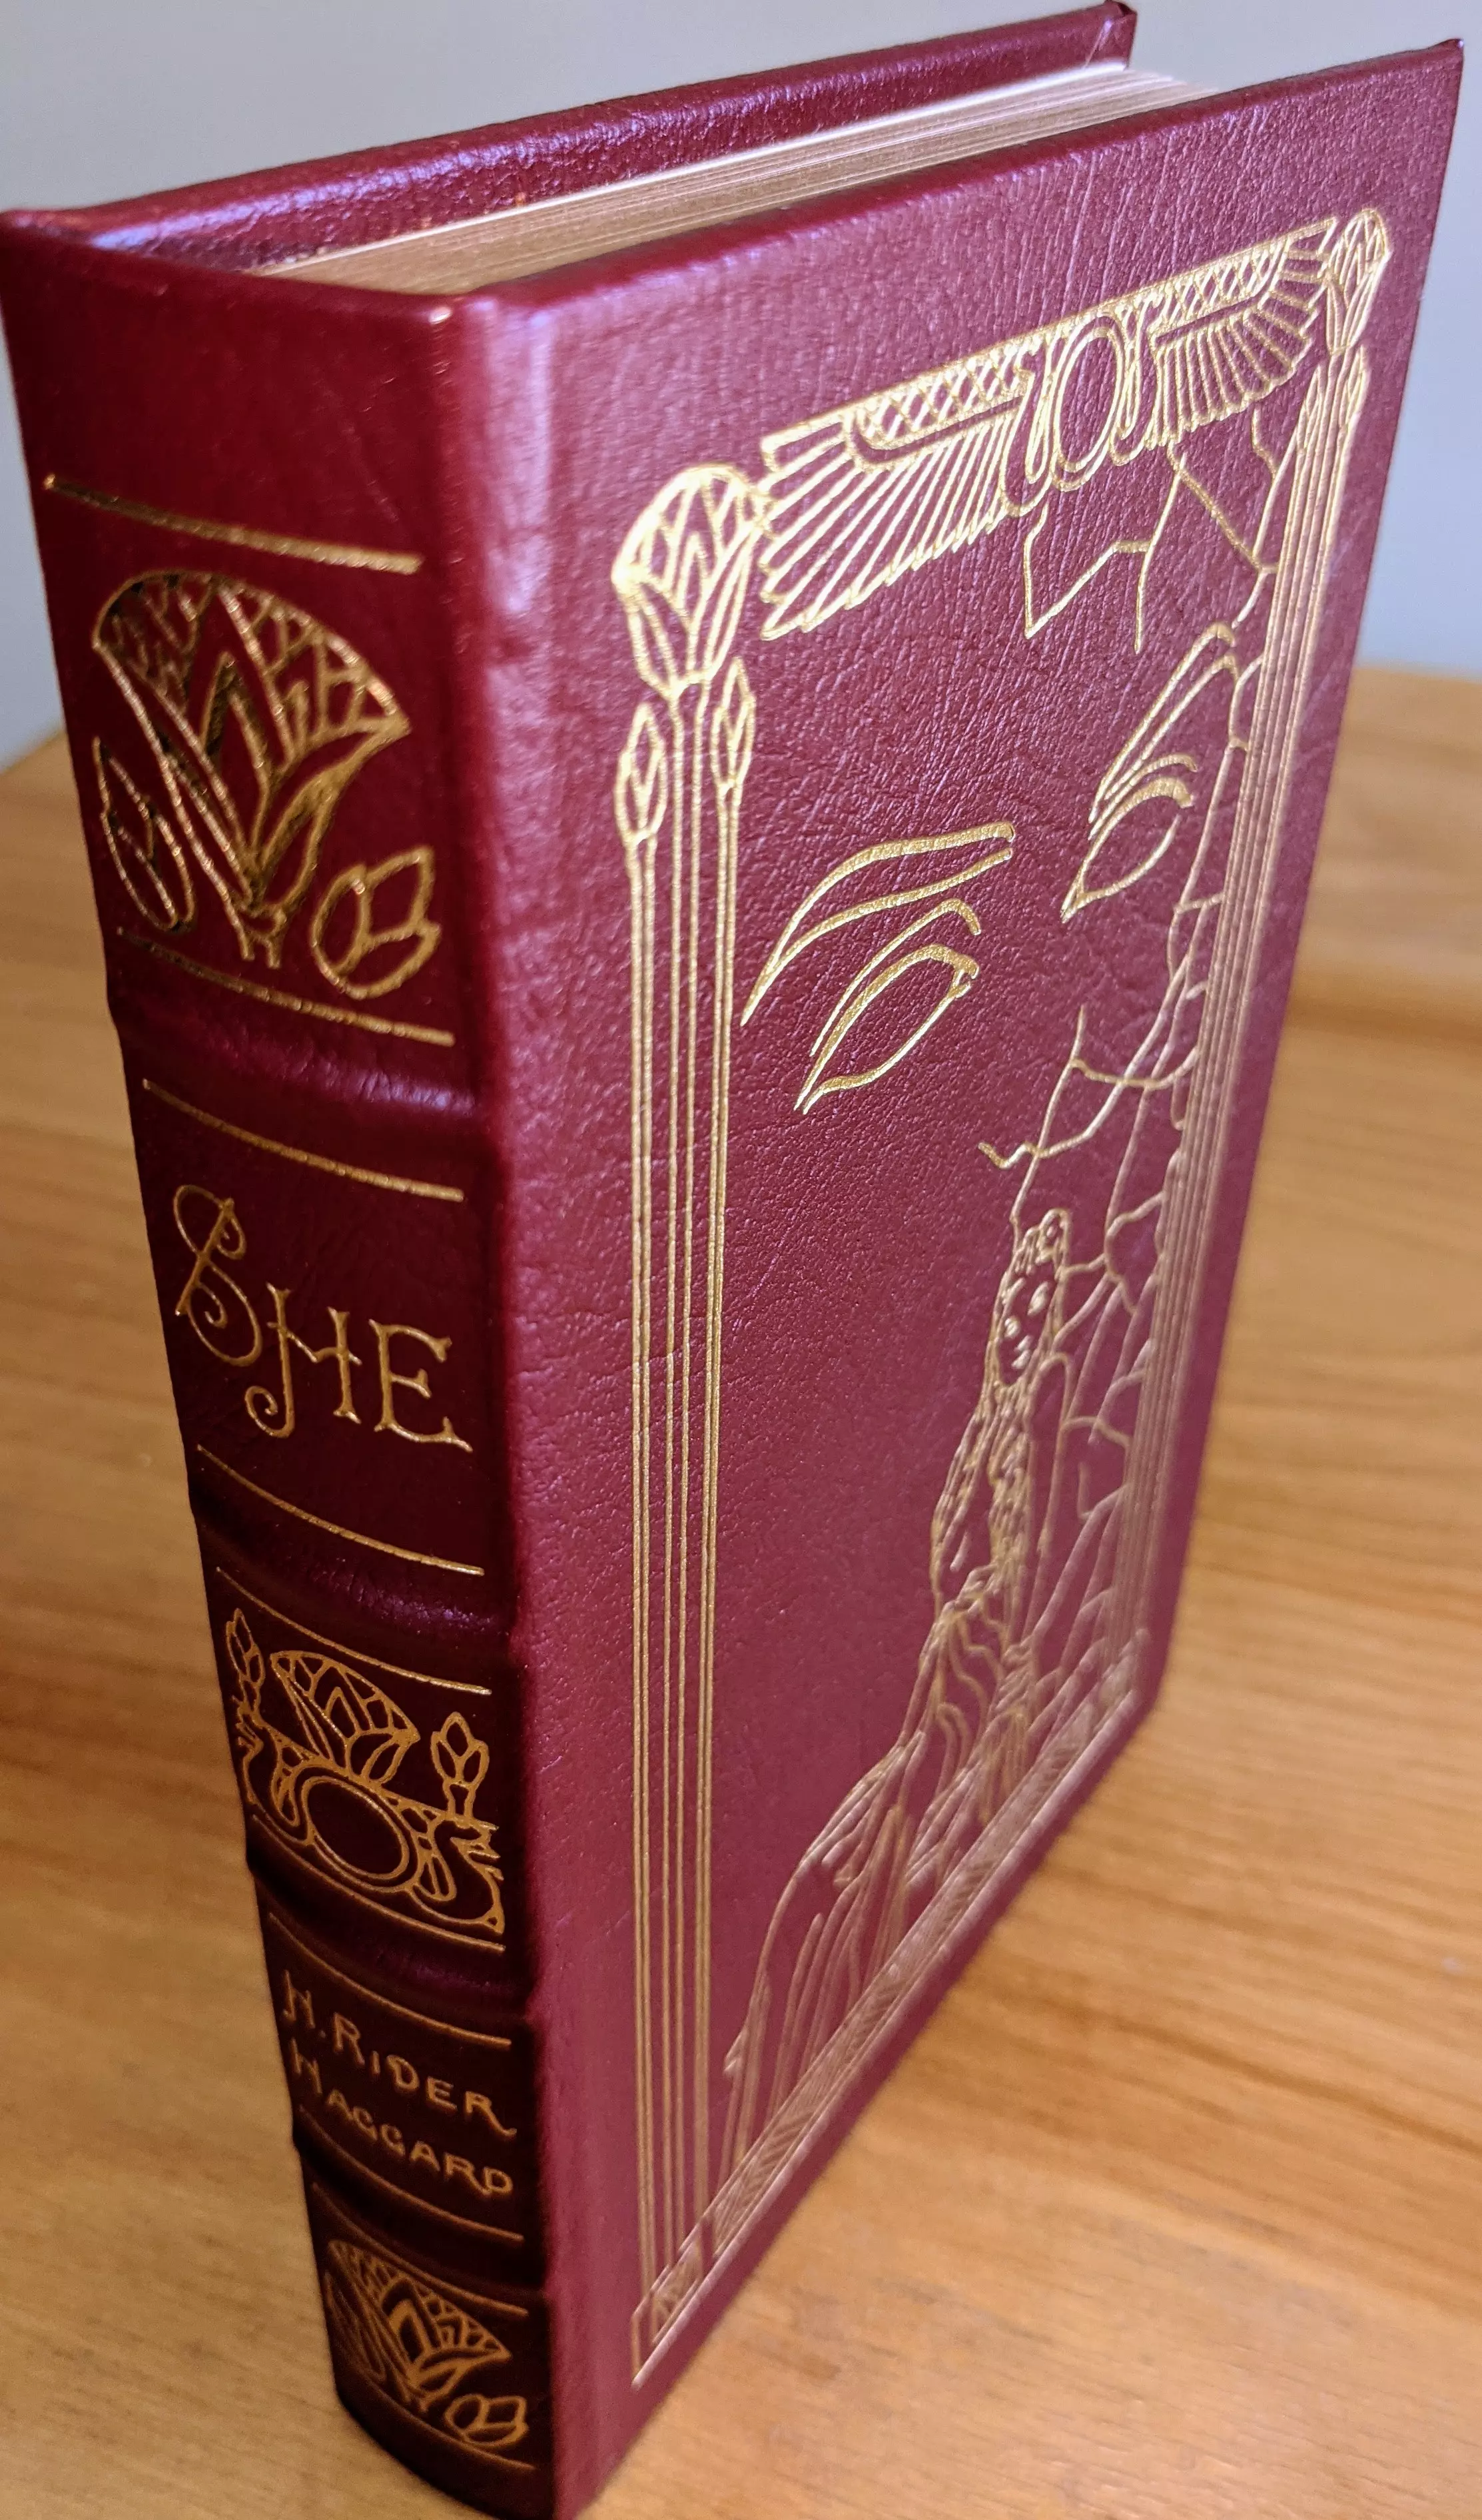 Stunning Red Leather Bound hardback book with hubbed spine, cover artwork in 22kt gold, printed on archival paper with gold gilded edges, smyth sewing & concealed muslin joints
	  - original artwork by Frank Kelly Freas